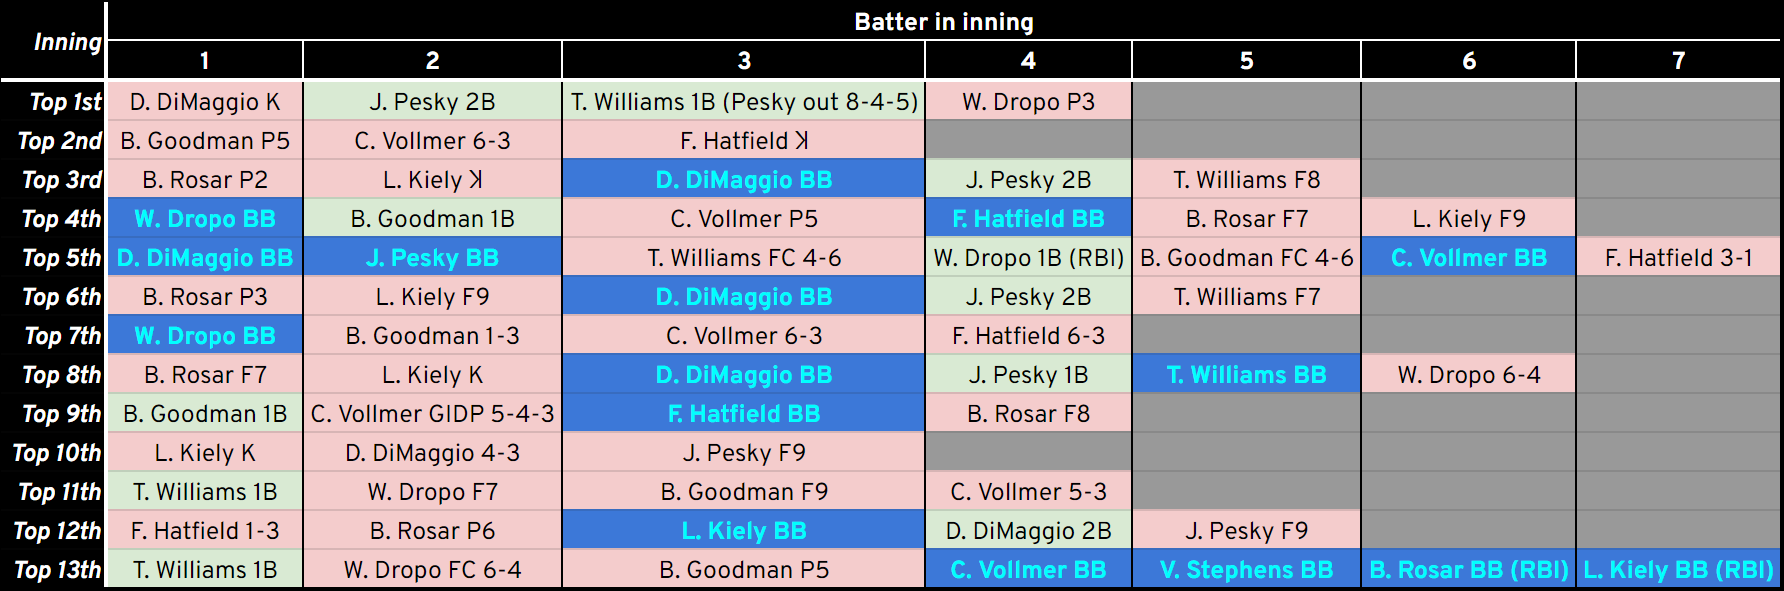 The play-by-play of Tommy Byrne's 16-walk start on August 22, 1951